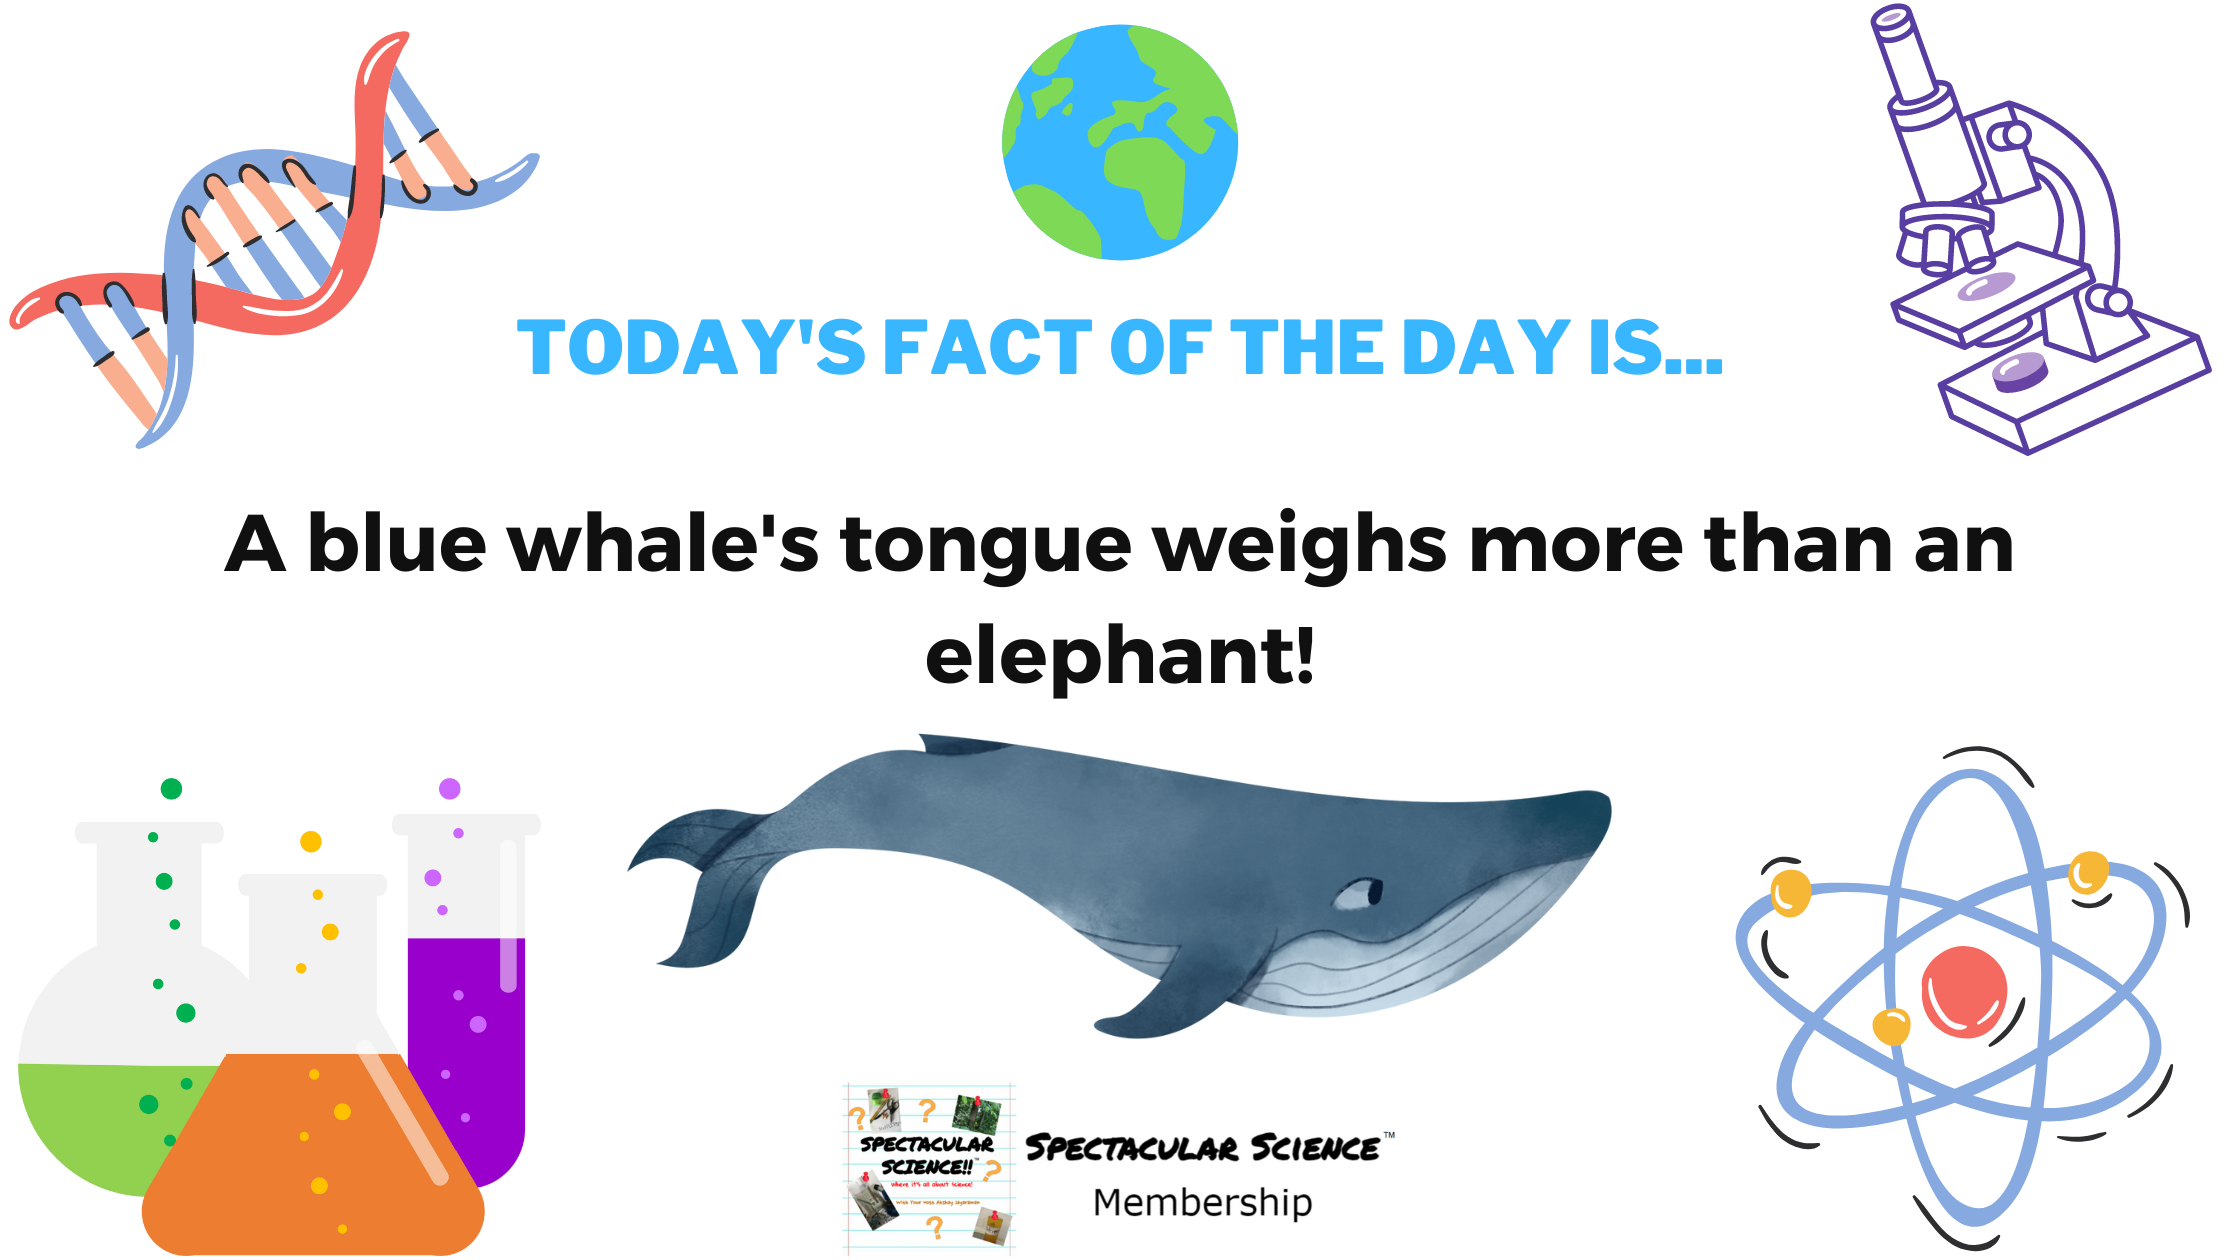 Fact of the Day Image February 11th